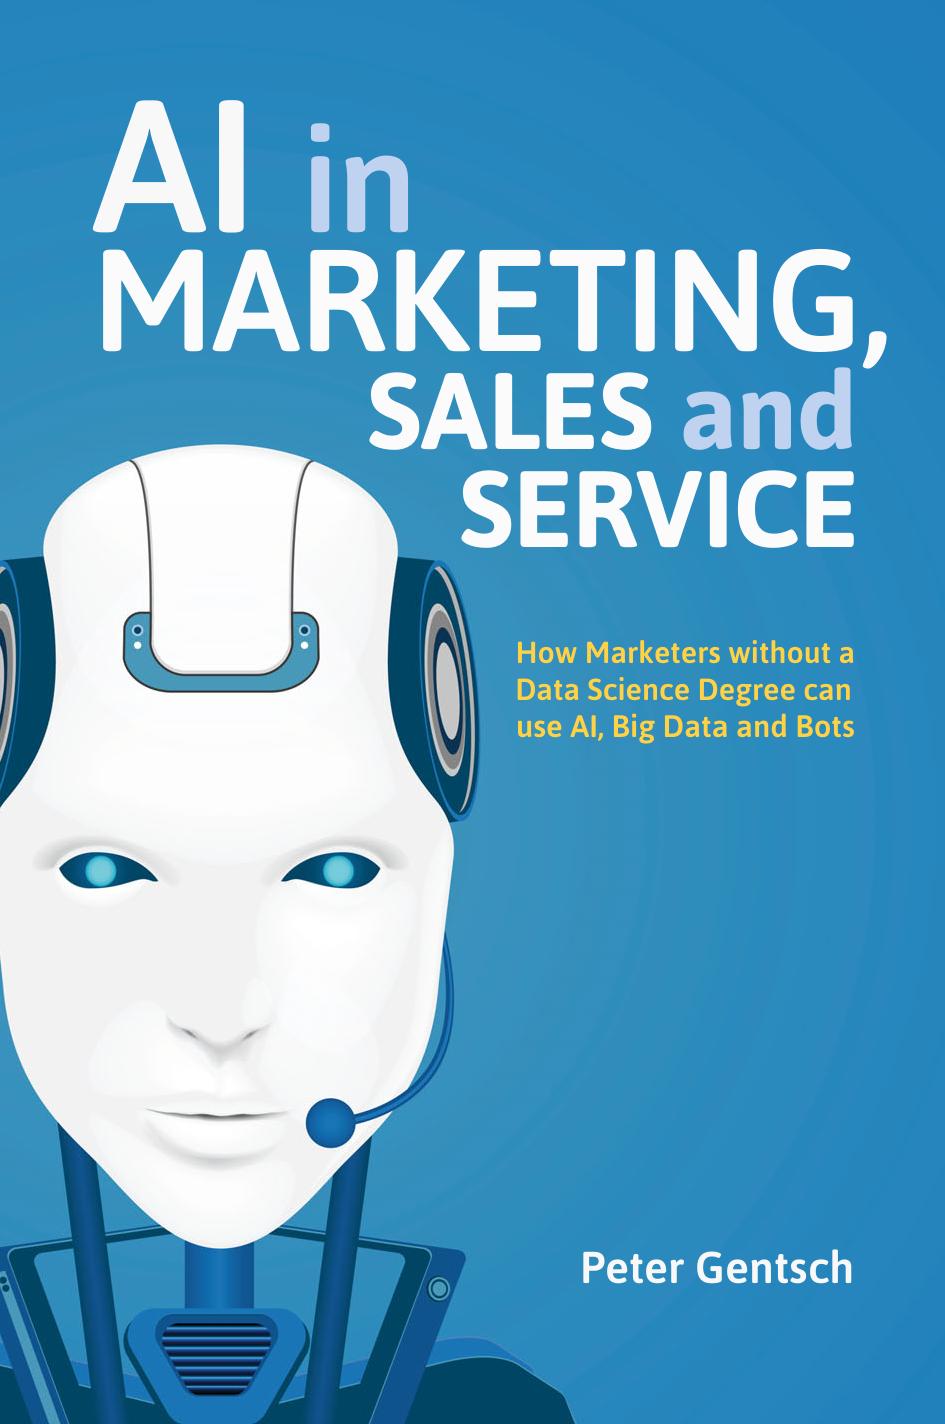 AI in Marketing, Sales and Service, 2018